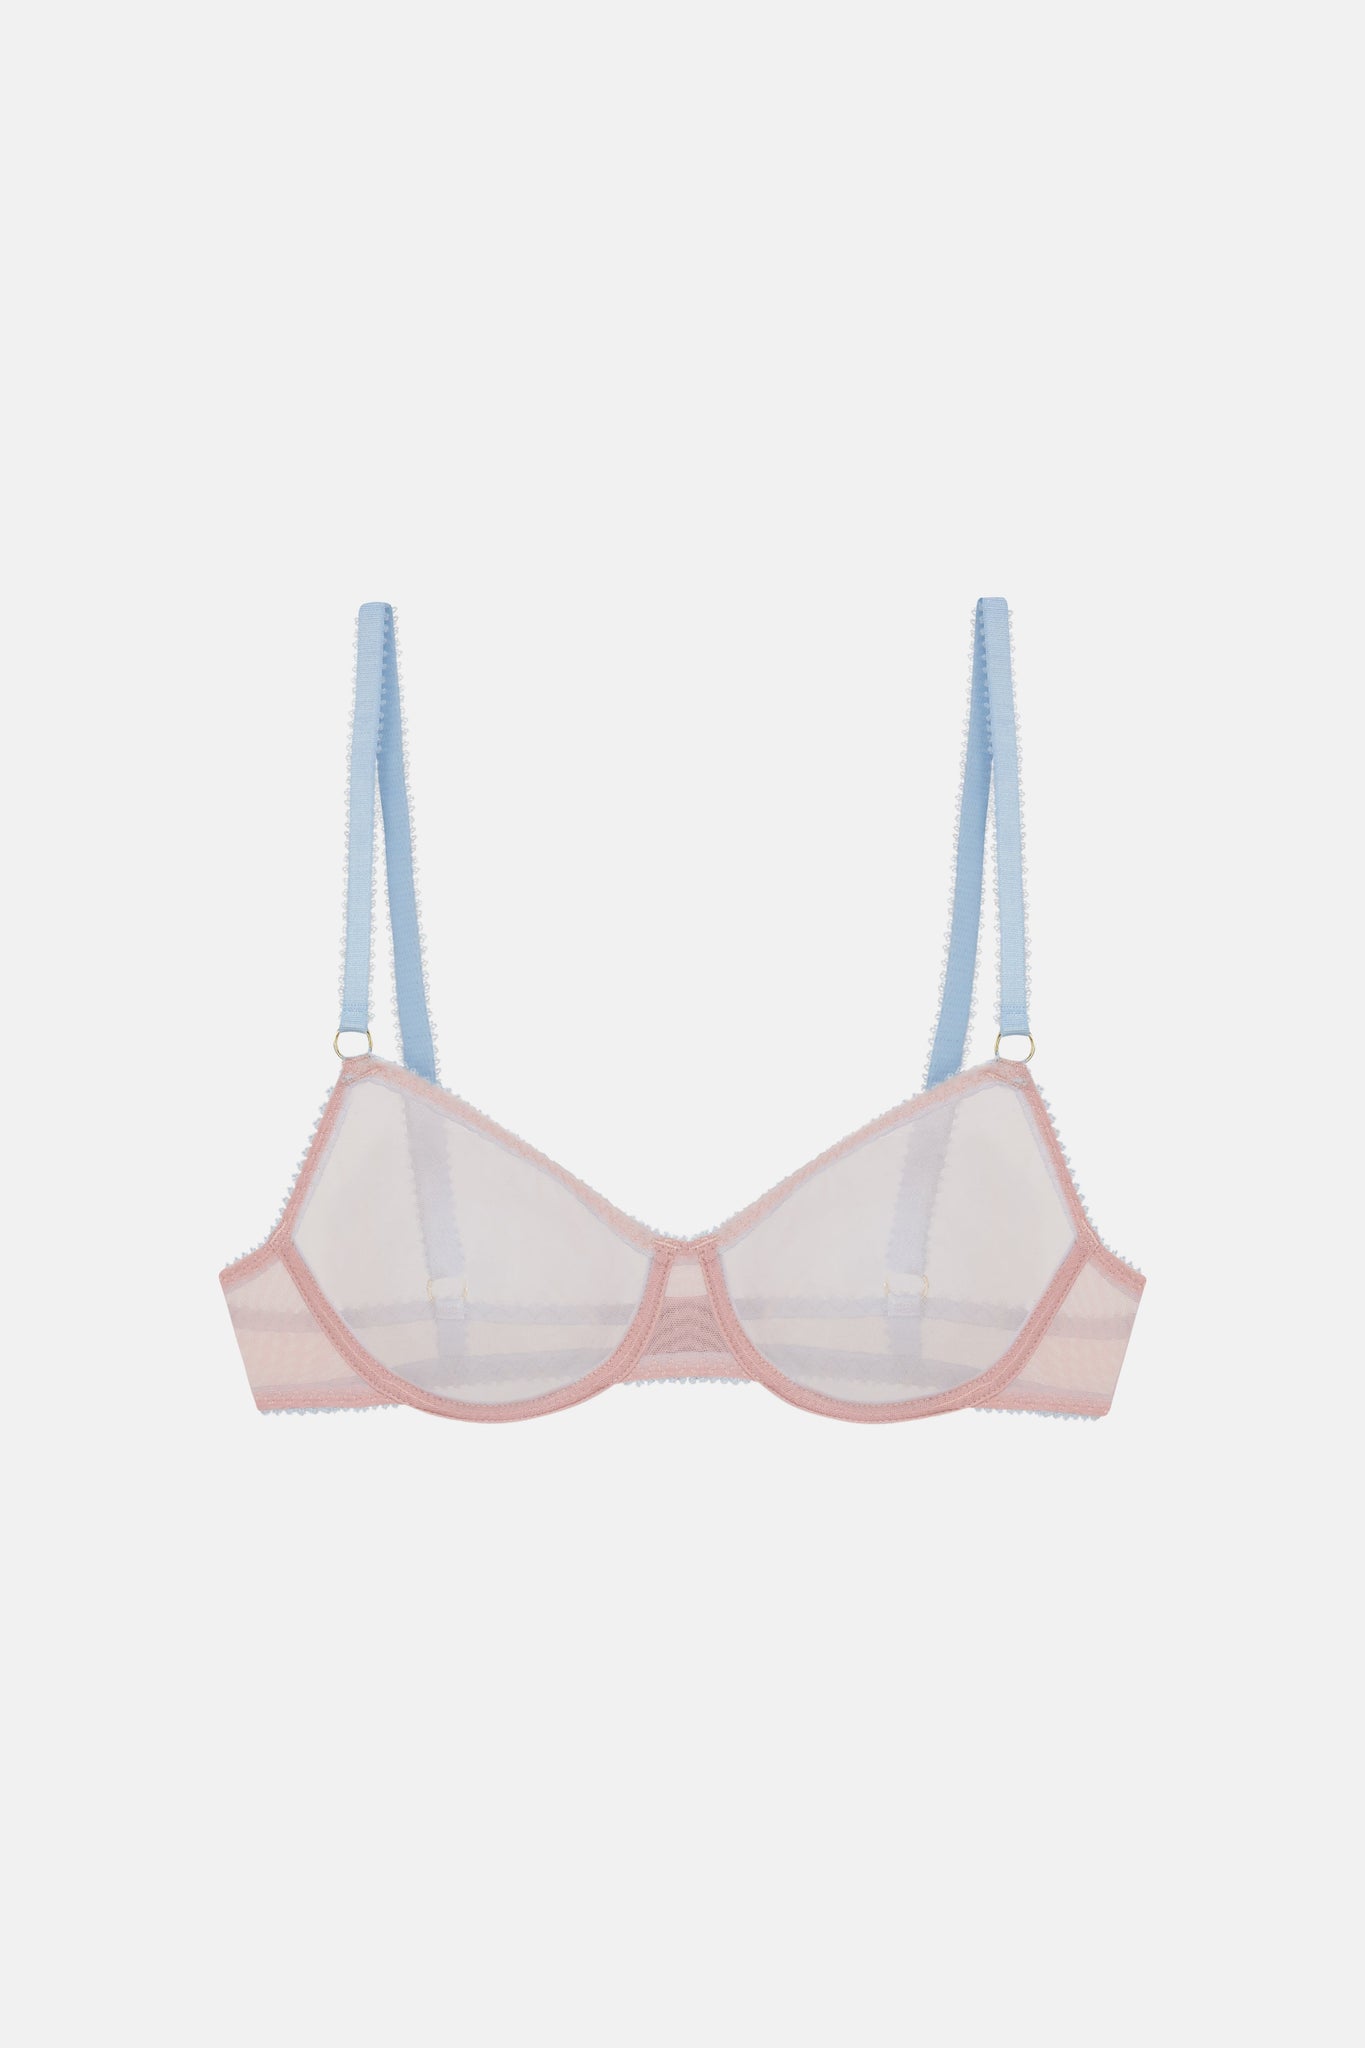 Dora Larsen Pernille Lingerie Set, Our April Fashion Wish List Reminds Us  of Our Youth, and We Love That